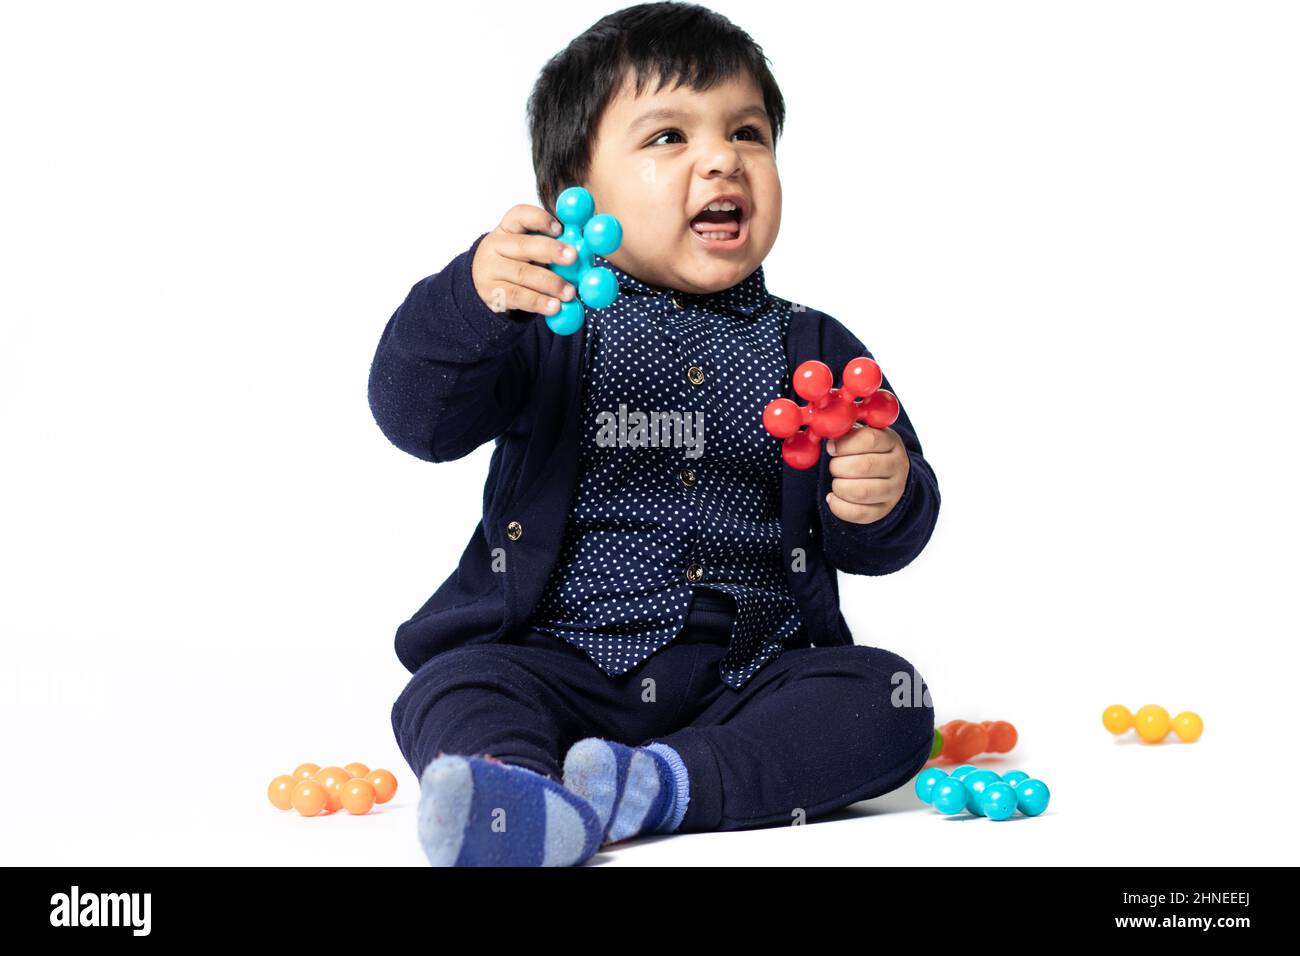 Happy Indian Toddler Playing With Colorful Toys Isolated On White Background. Fun, Activity, Educational, Kindergarten, Birthday, Learning, Home Activ Stock Photo